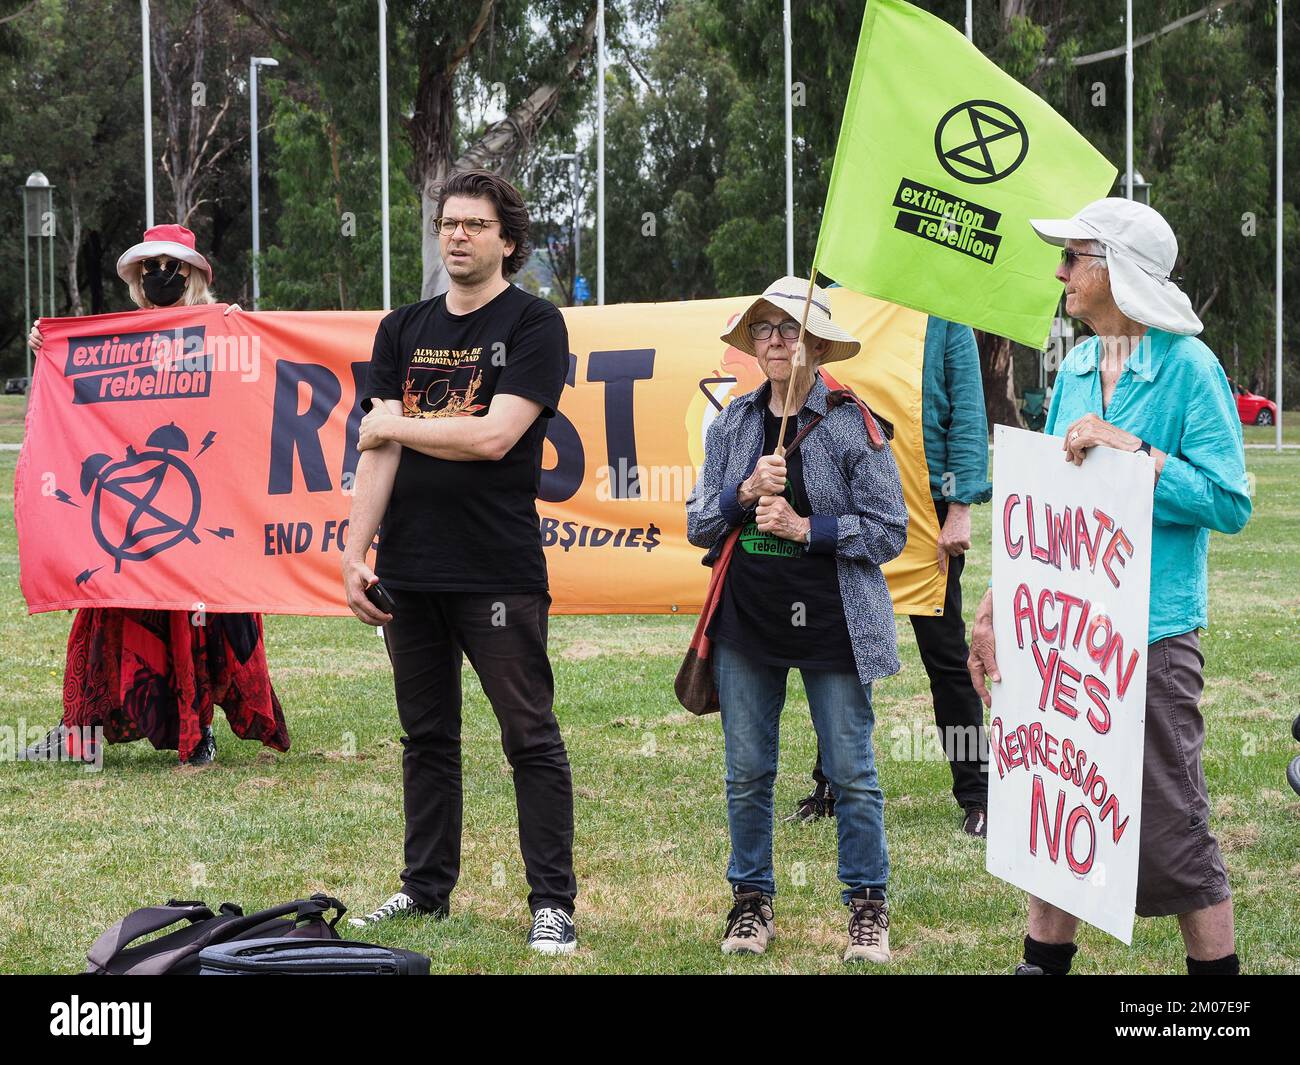 Canberra, Australia. 05th Dec, 2022. Climate protesters from a range of organisations rallied in front of Parliament House to protest the draconian sentence of 15 months prison given to Violet Coco for blocking Sydney Harbour Bridge. Credit: Leo Bild/Alamy Live News Stock Photo